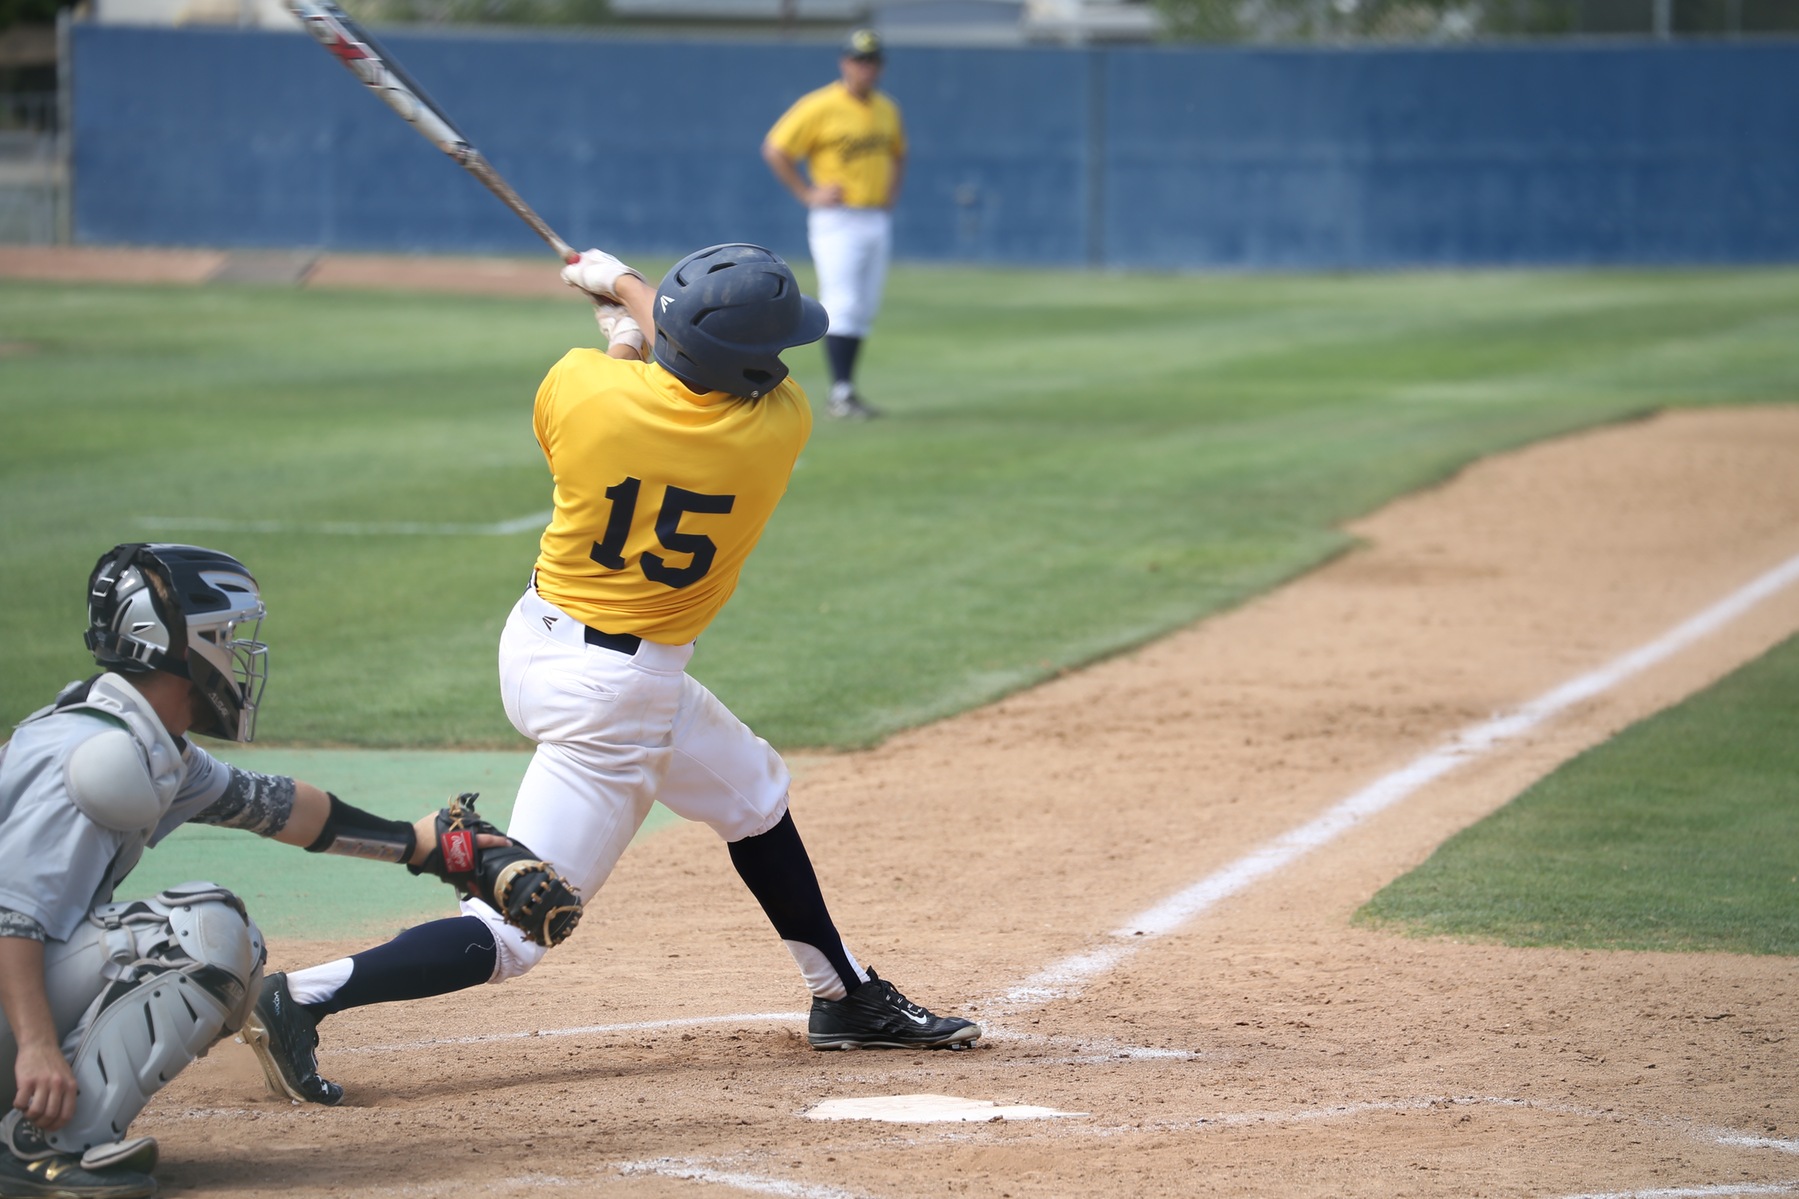 Canyons Center Fielder Cole Kleszcz Named CCCBCA Player of the Week